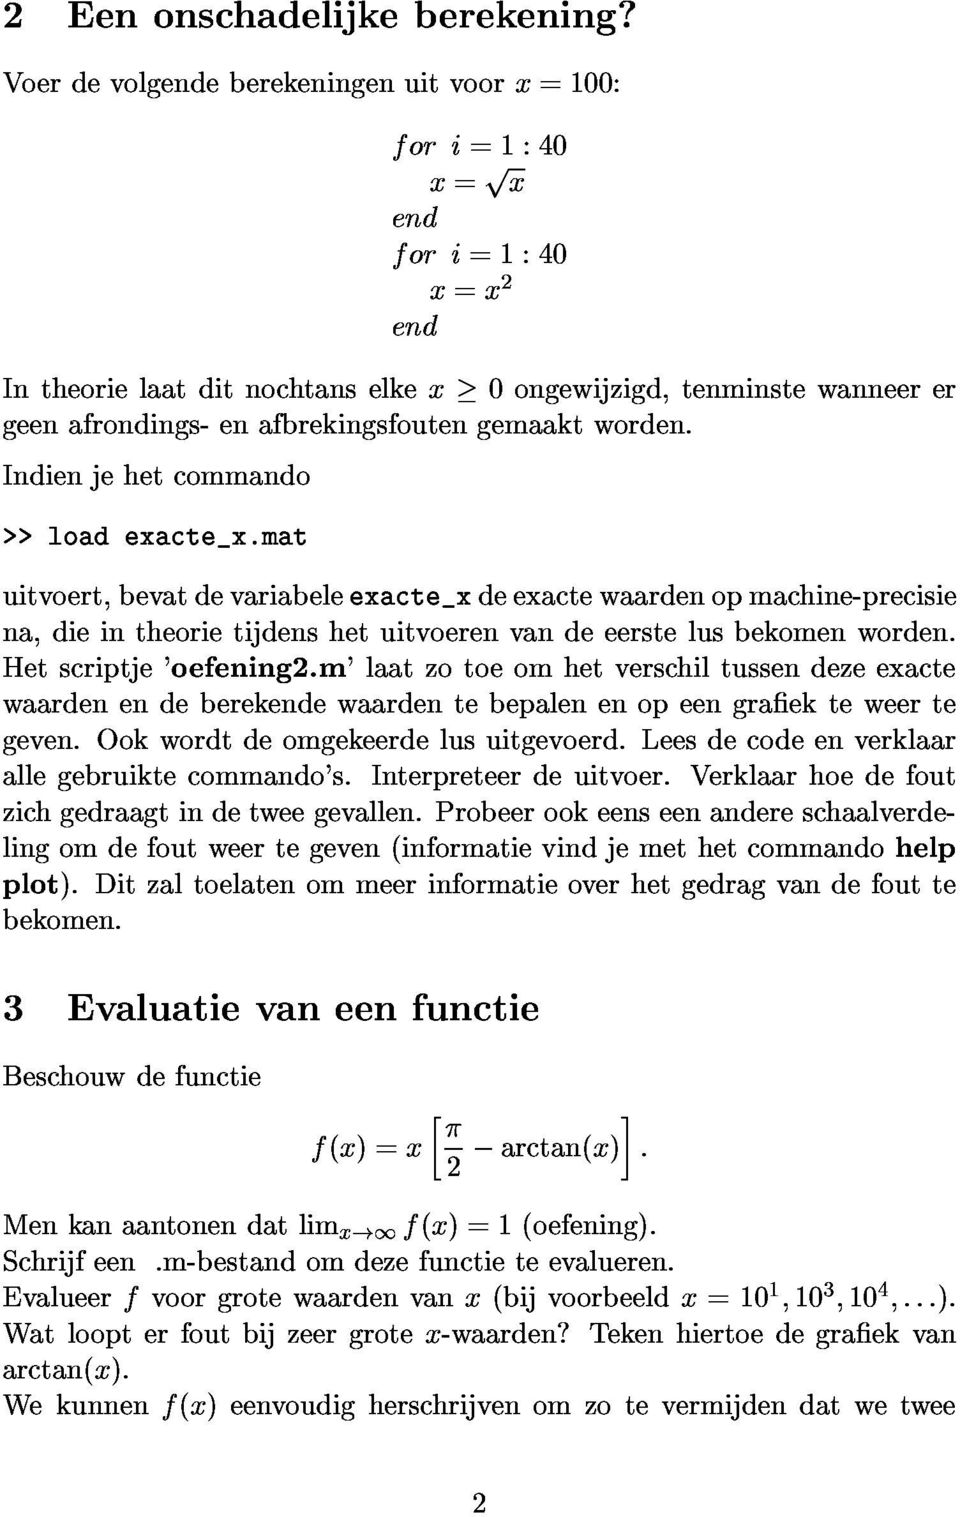 Geheugensteuntje Foutenanalyse Absolute Fout X X X Relatieve Fout Dx X X X X X X X X X 1 Dx Pdf Gratis Download